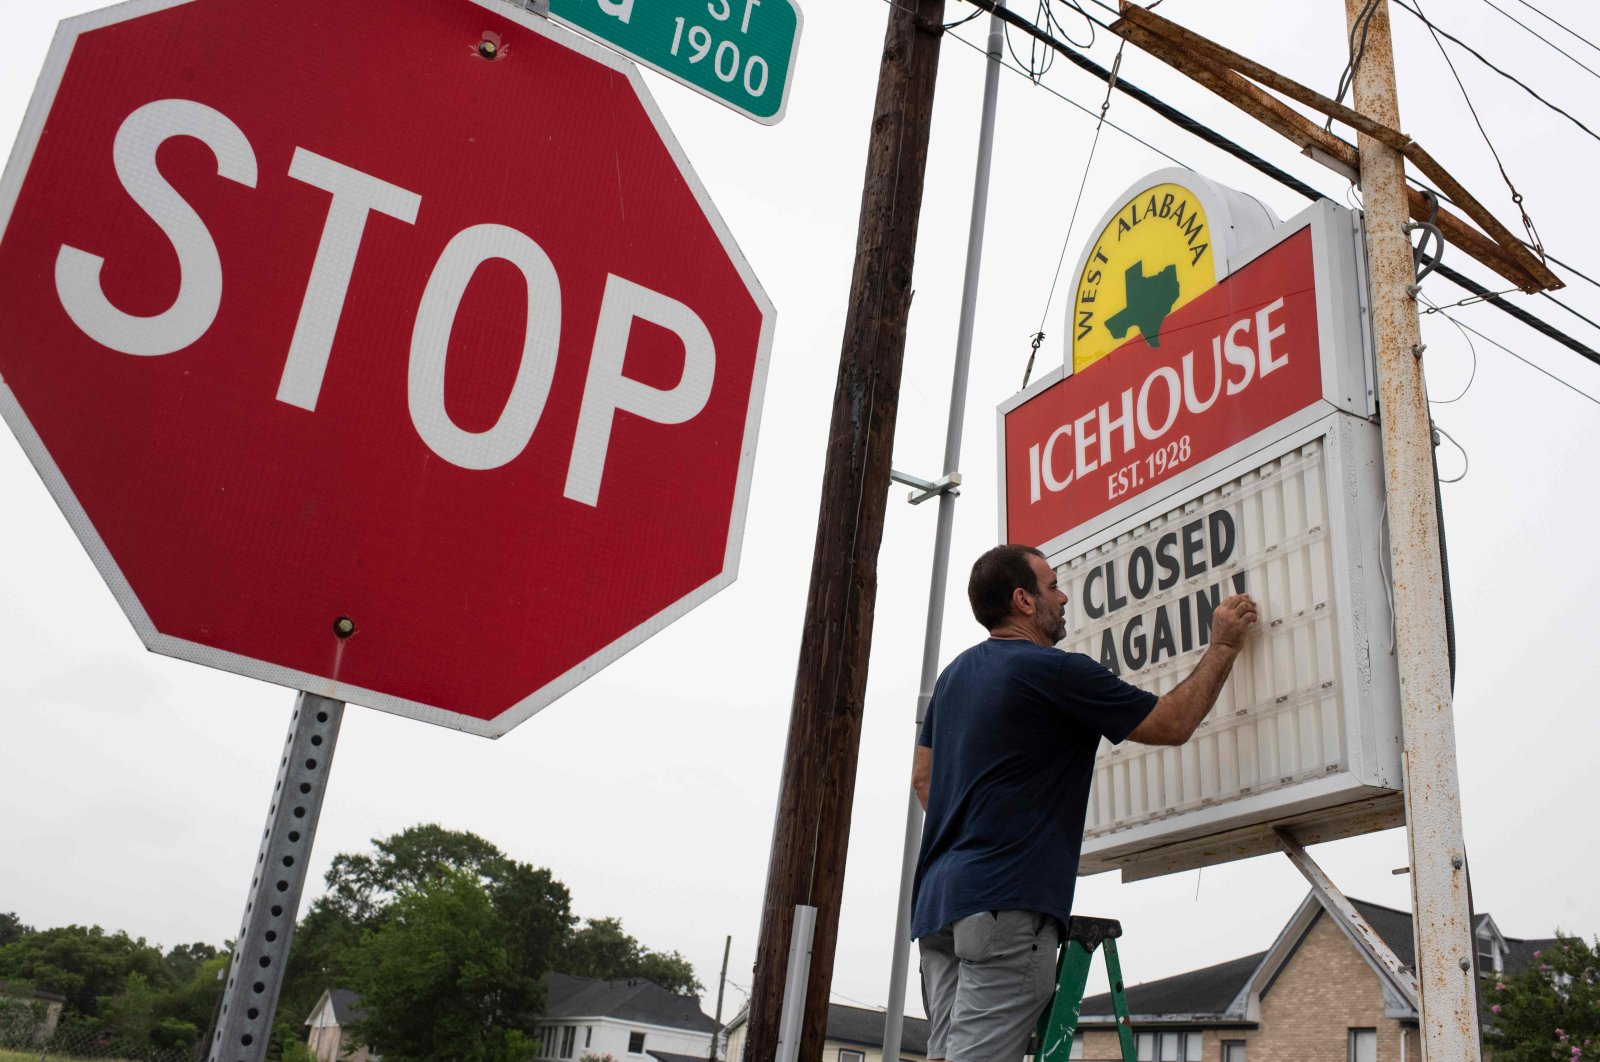 Bar owner Petros J Markantonis changes the marquee outside his bar to "Closed Again" at the West Alabama Ice House in Houston, Texas, June 26, 2020. (AFP)